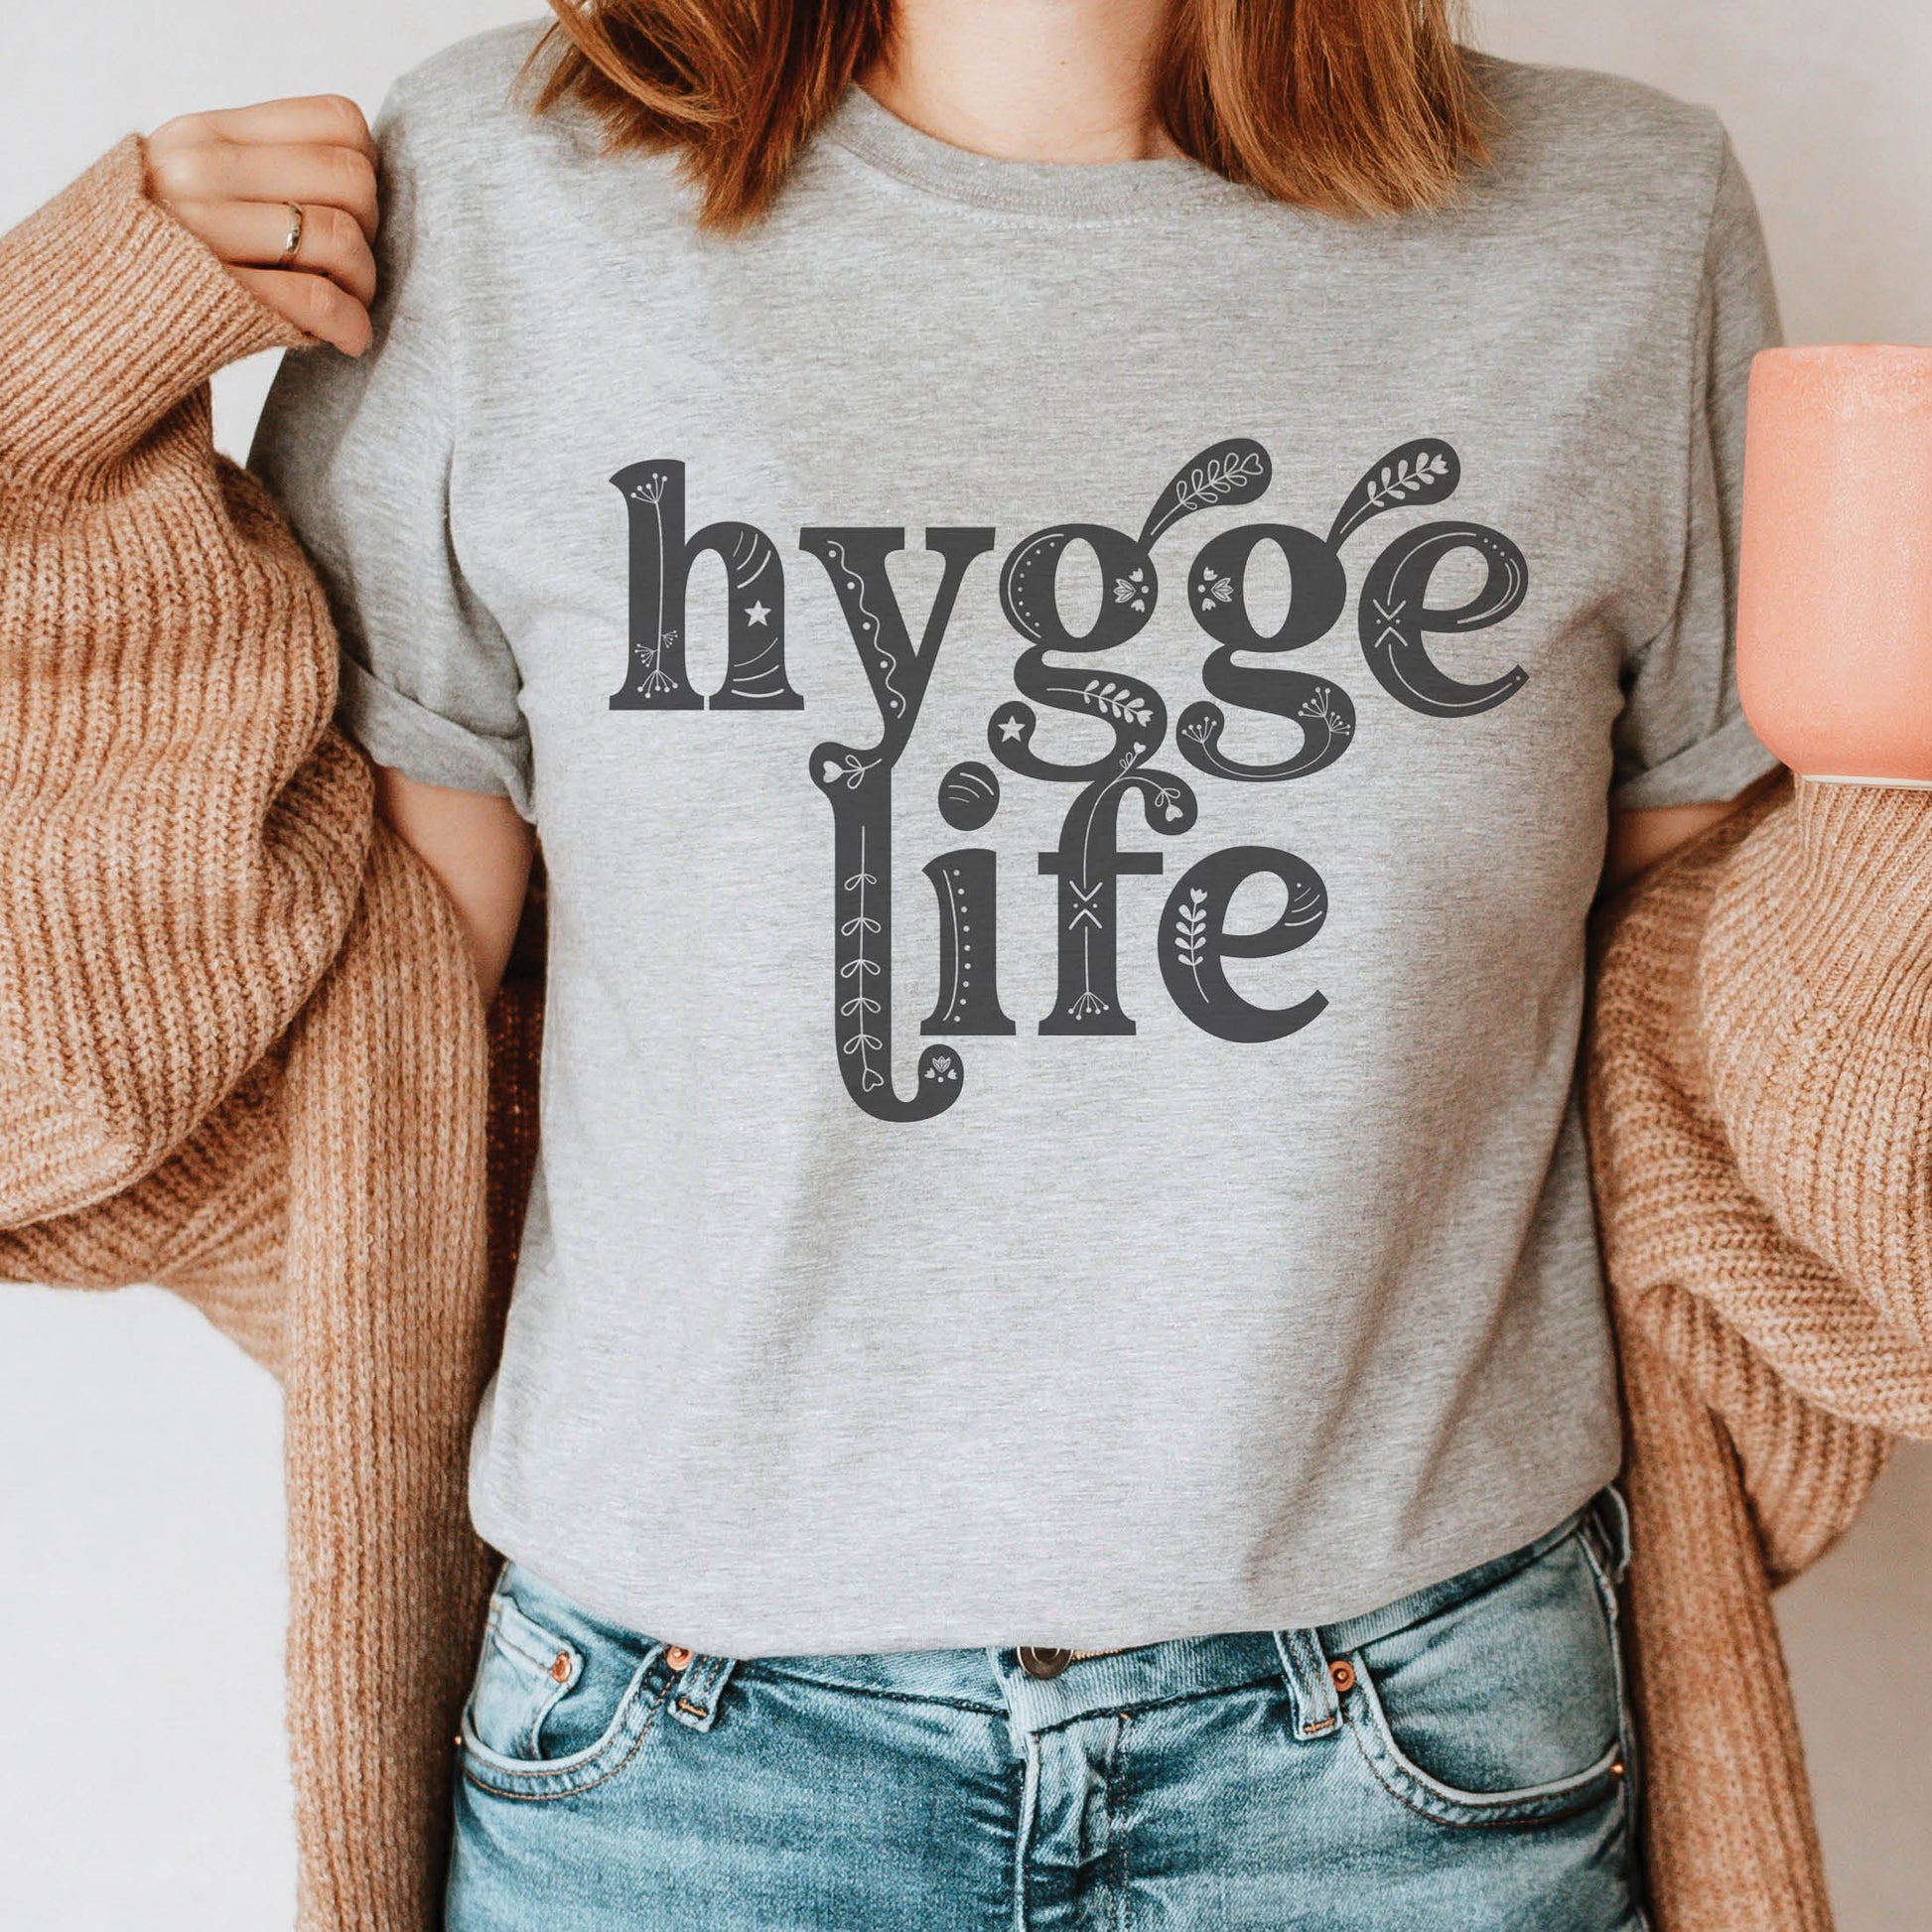 Coziness vibes woman wearing a heather gray Hygge Life Holy Hygge Women's unisex Christian t-shirt with Scandinavian floral and heart art for the cozy fall and winter season